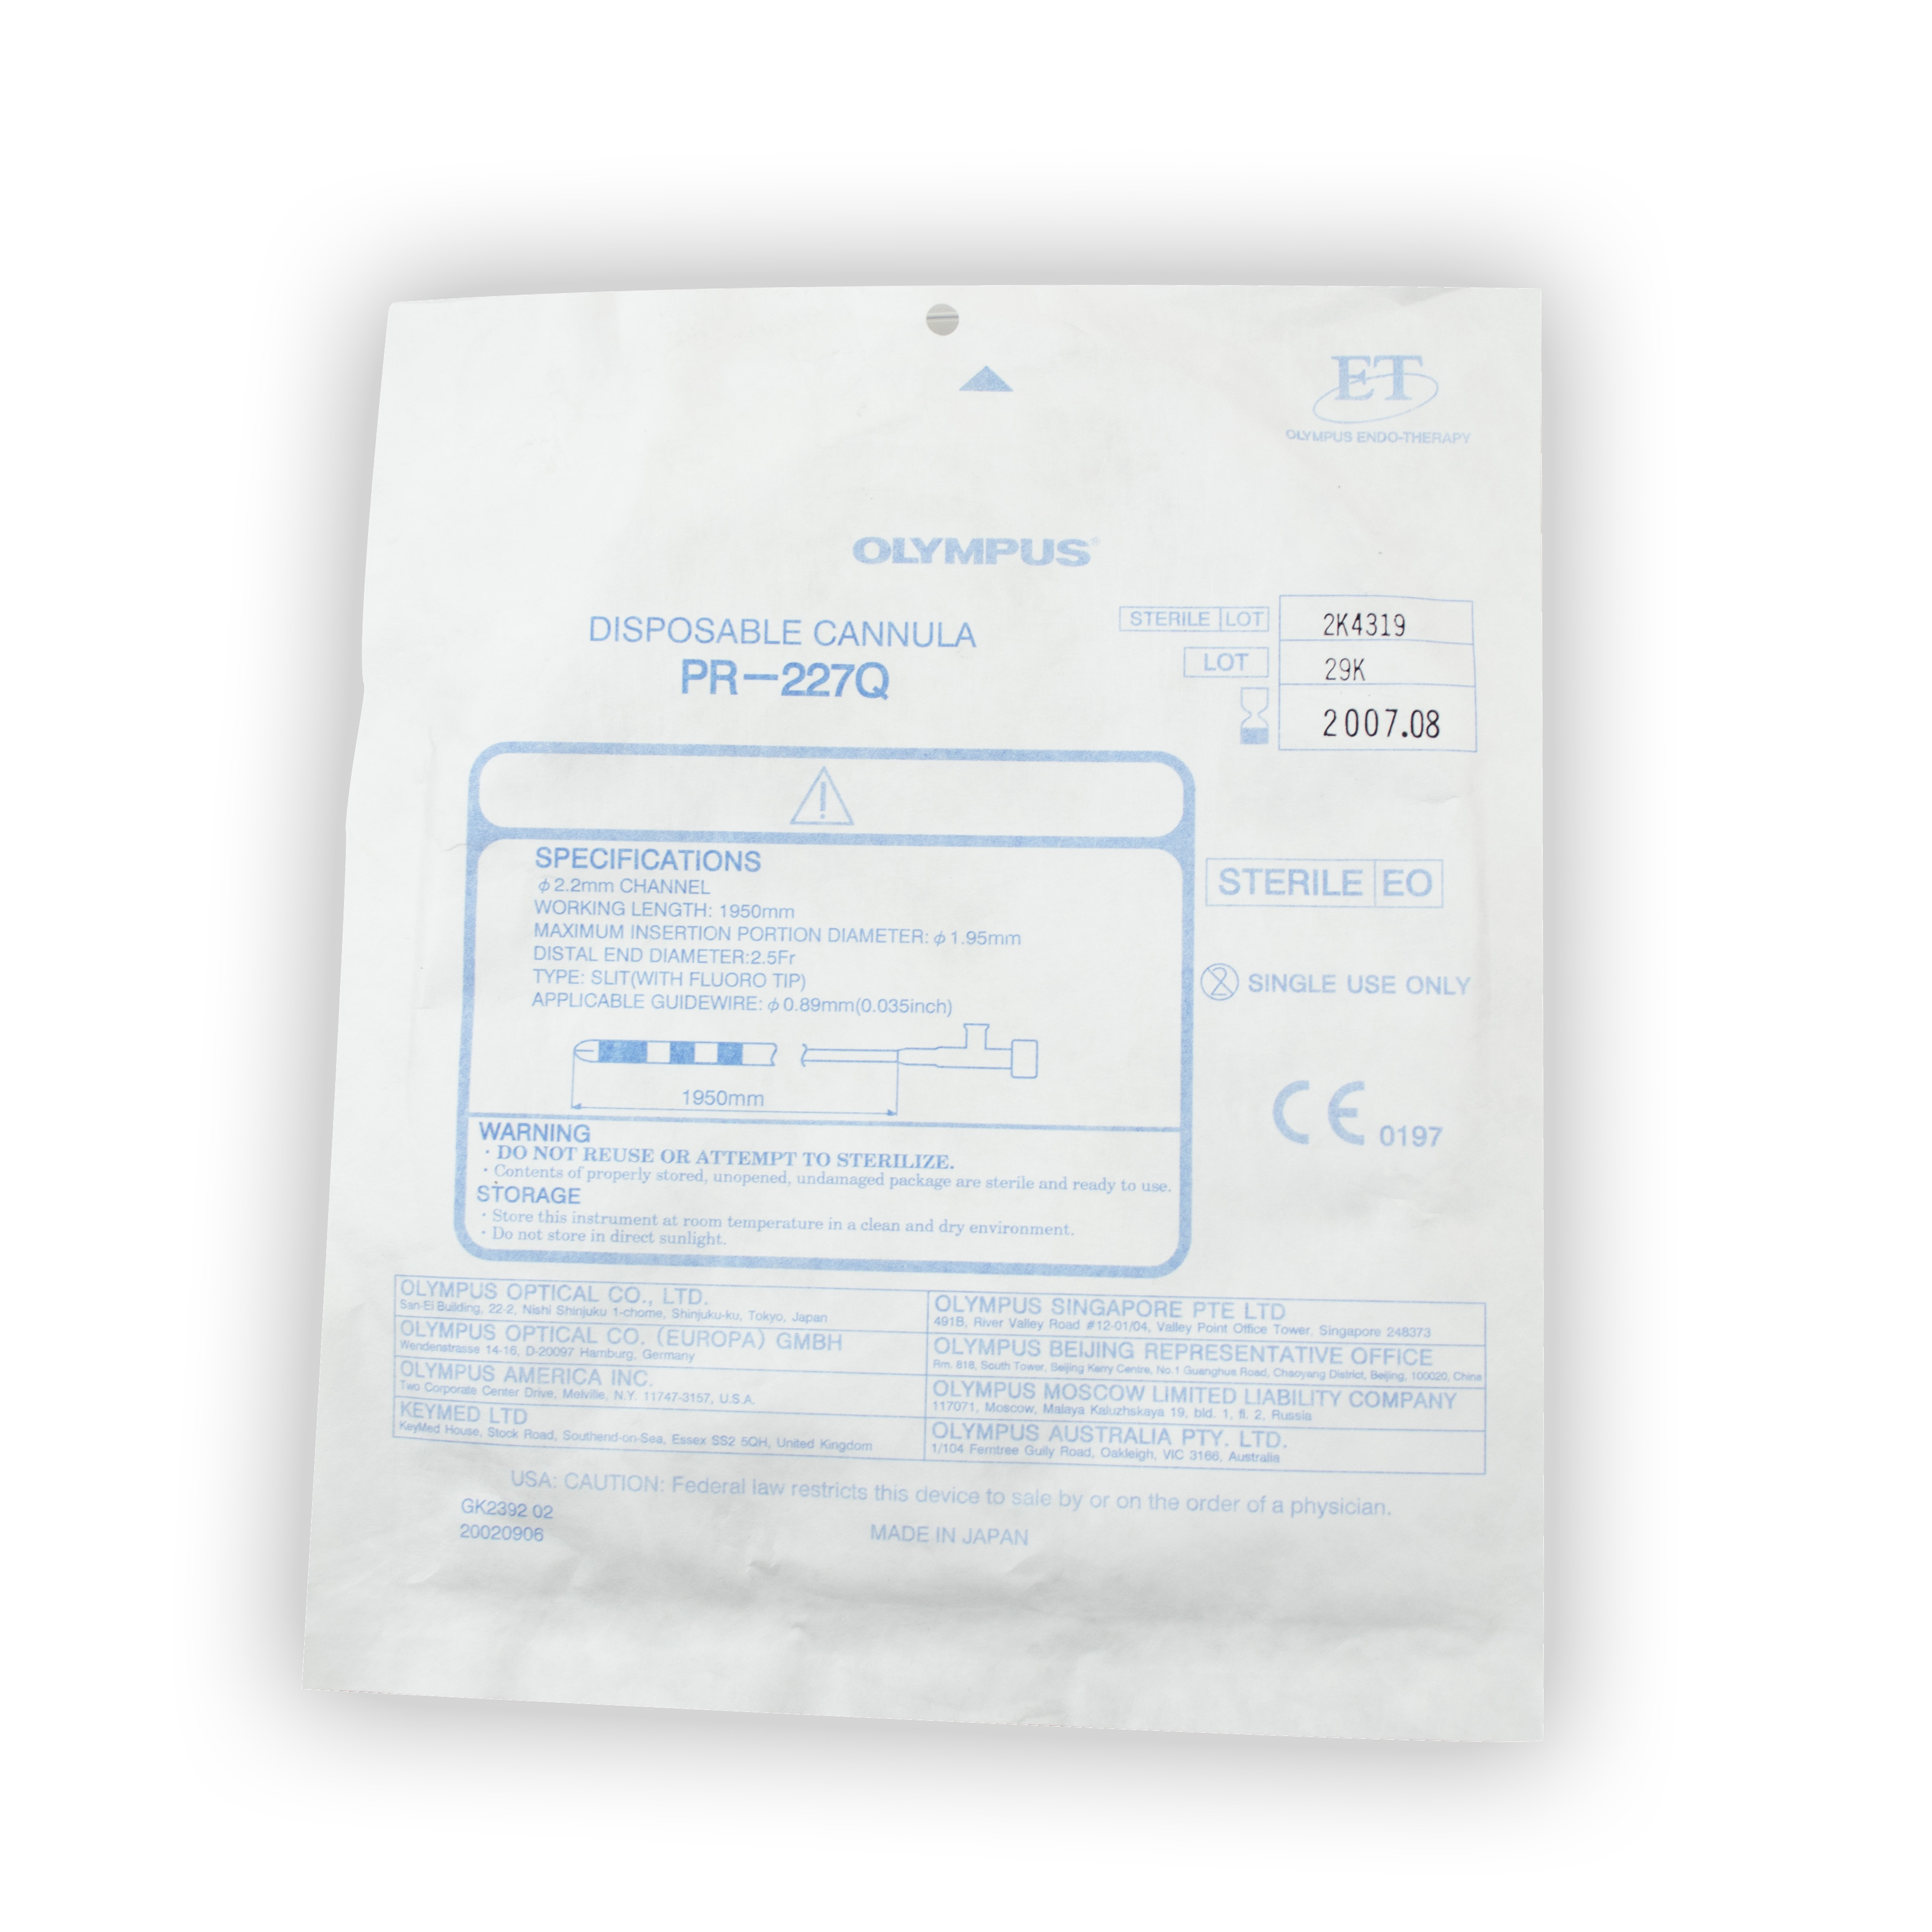 [Out-of-Date] Olympus Disposable Cannula - PR-227Q